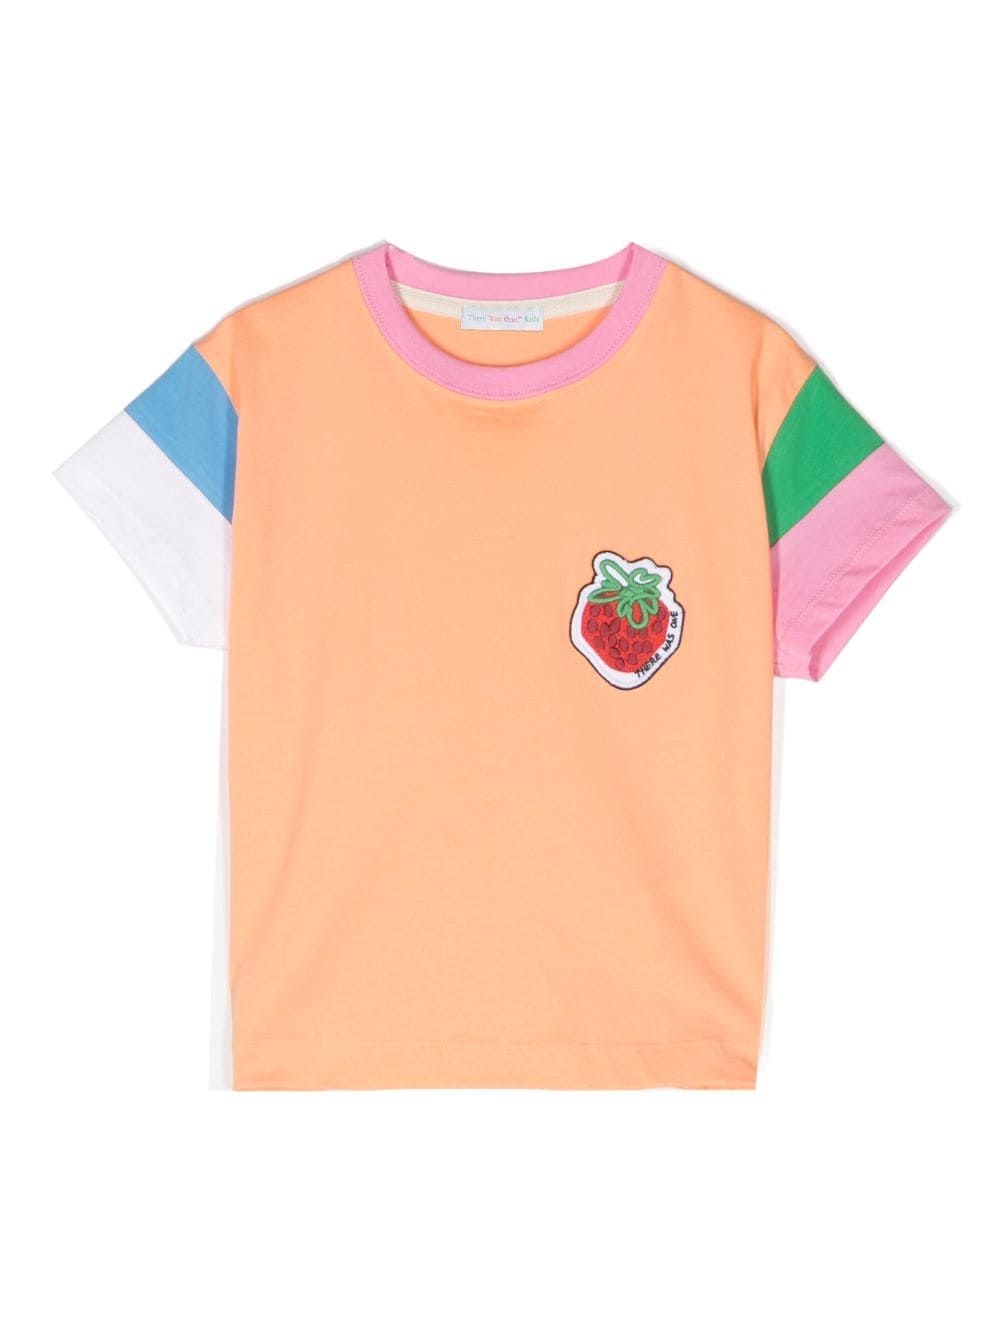 There Was One Kids strawberry-patch cotton T-shirt - Orange von There Was One Kids